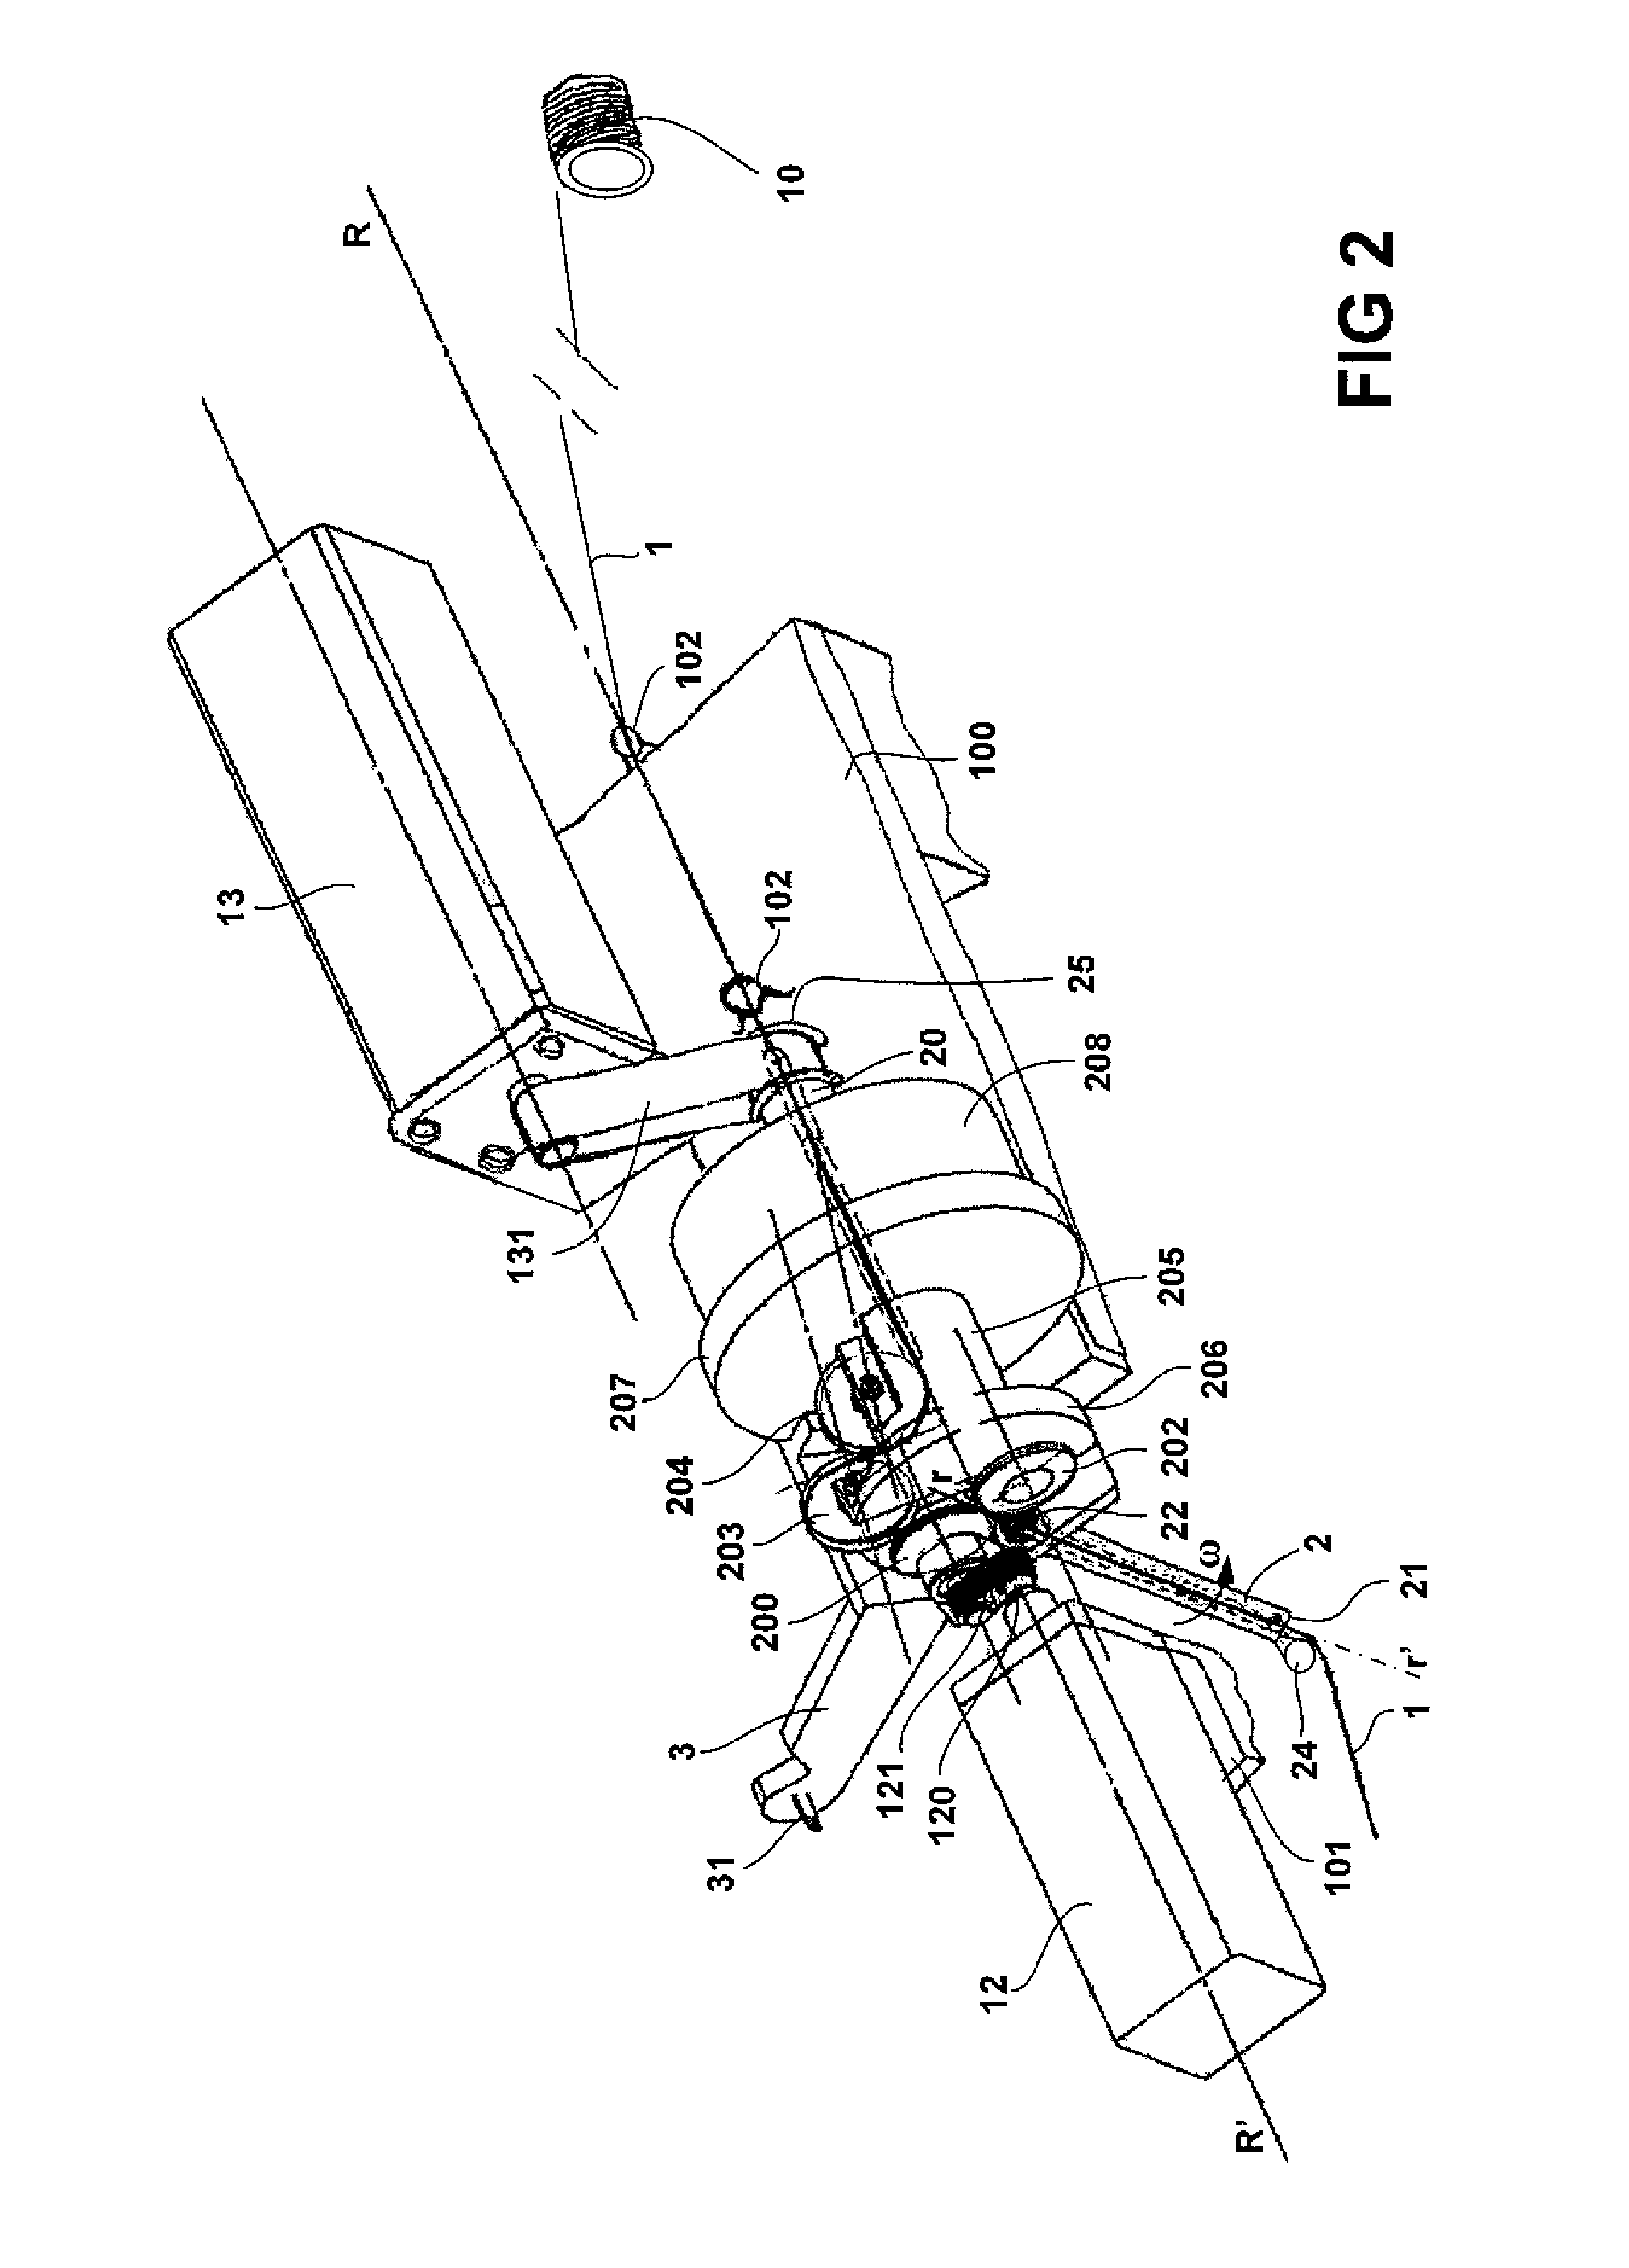 Rotary laying arm comprising an on-board thread feed means